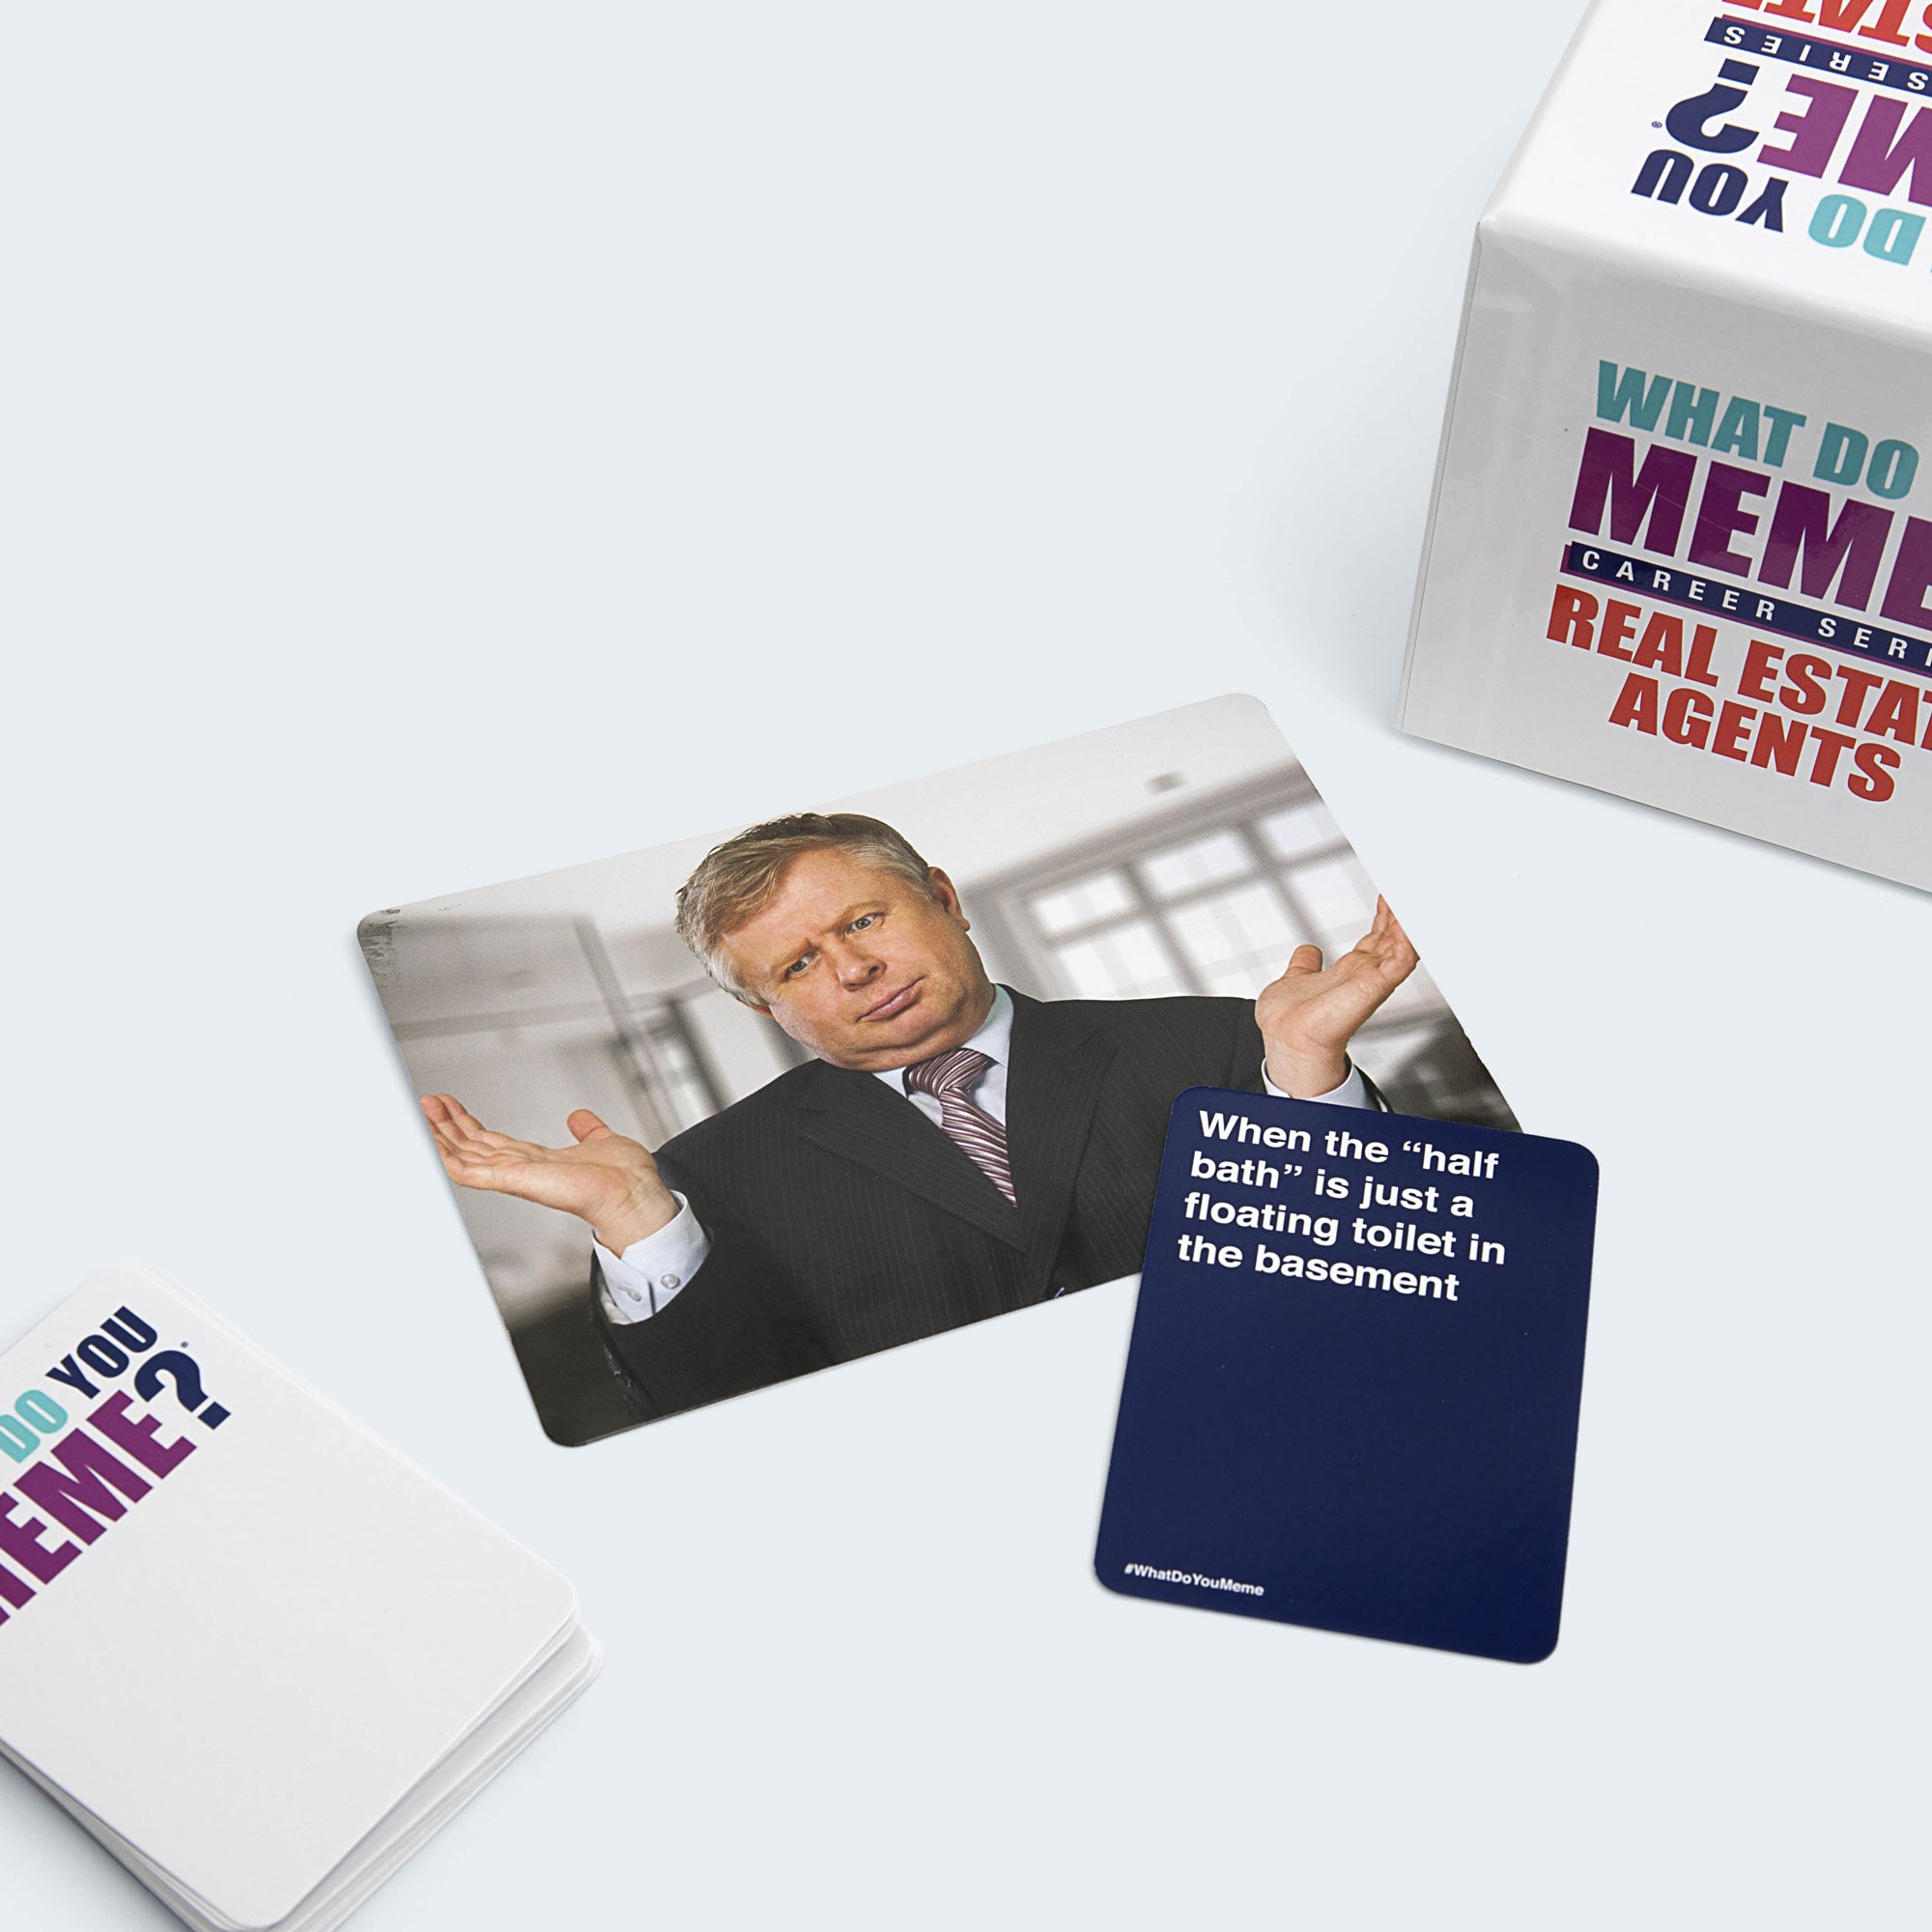 What Do You Meme?® Nurses Edition - the Adult Party Game Made Just for  Nurses! 